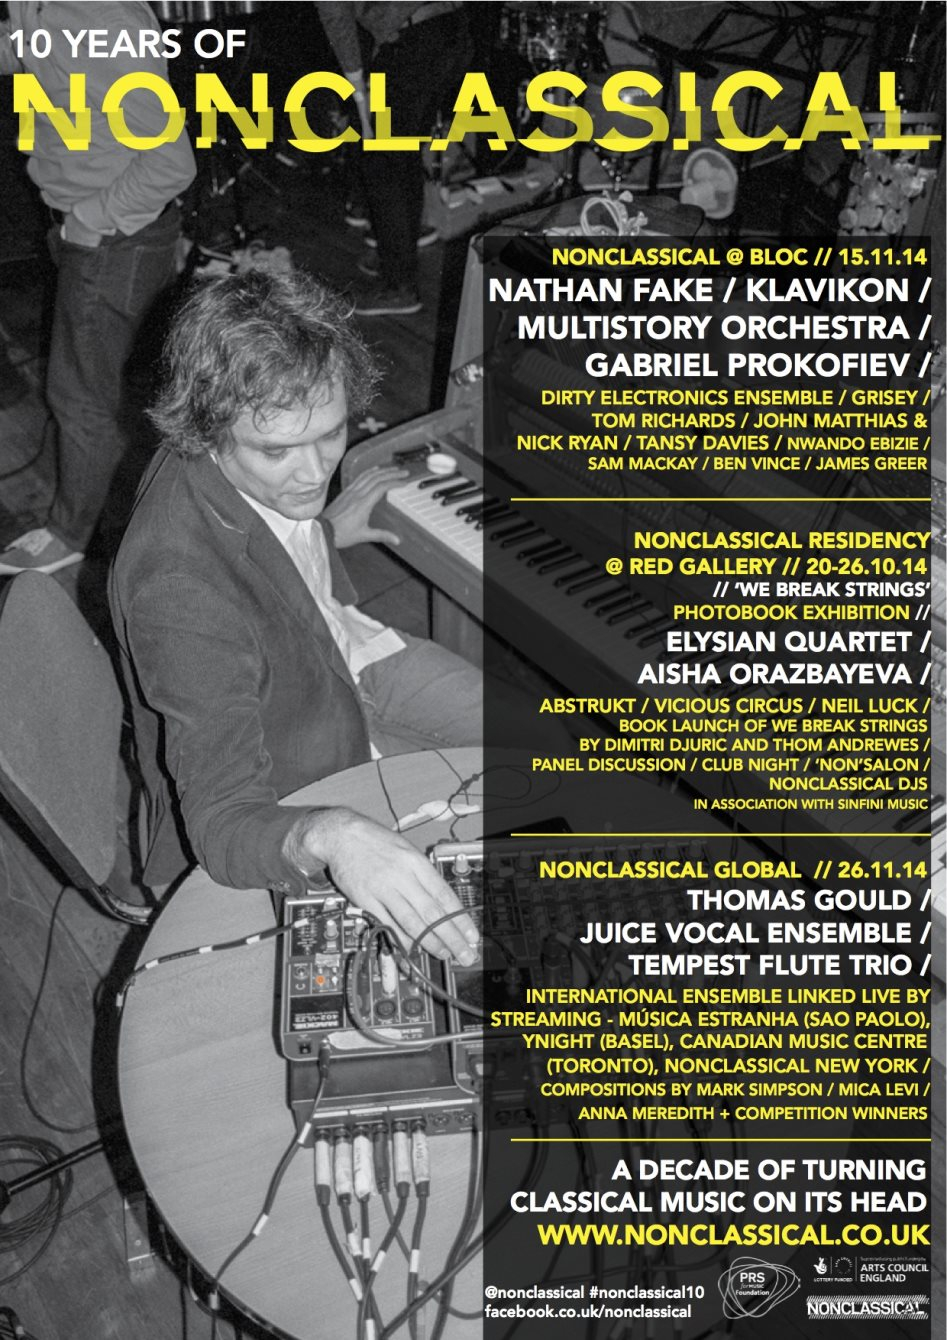 Nonclassical Bloc Feat. Nathan Fake - Flyer front